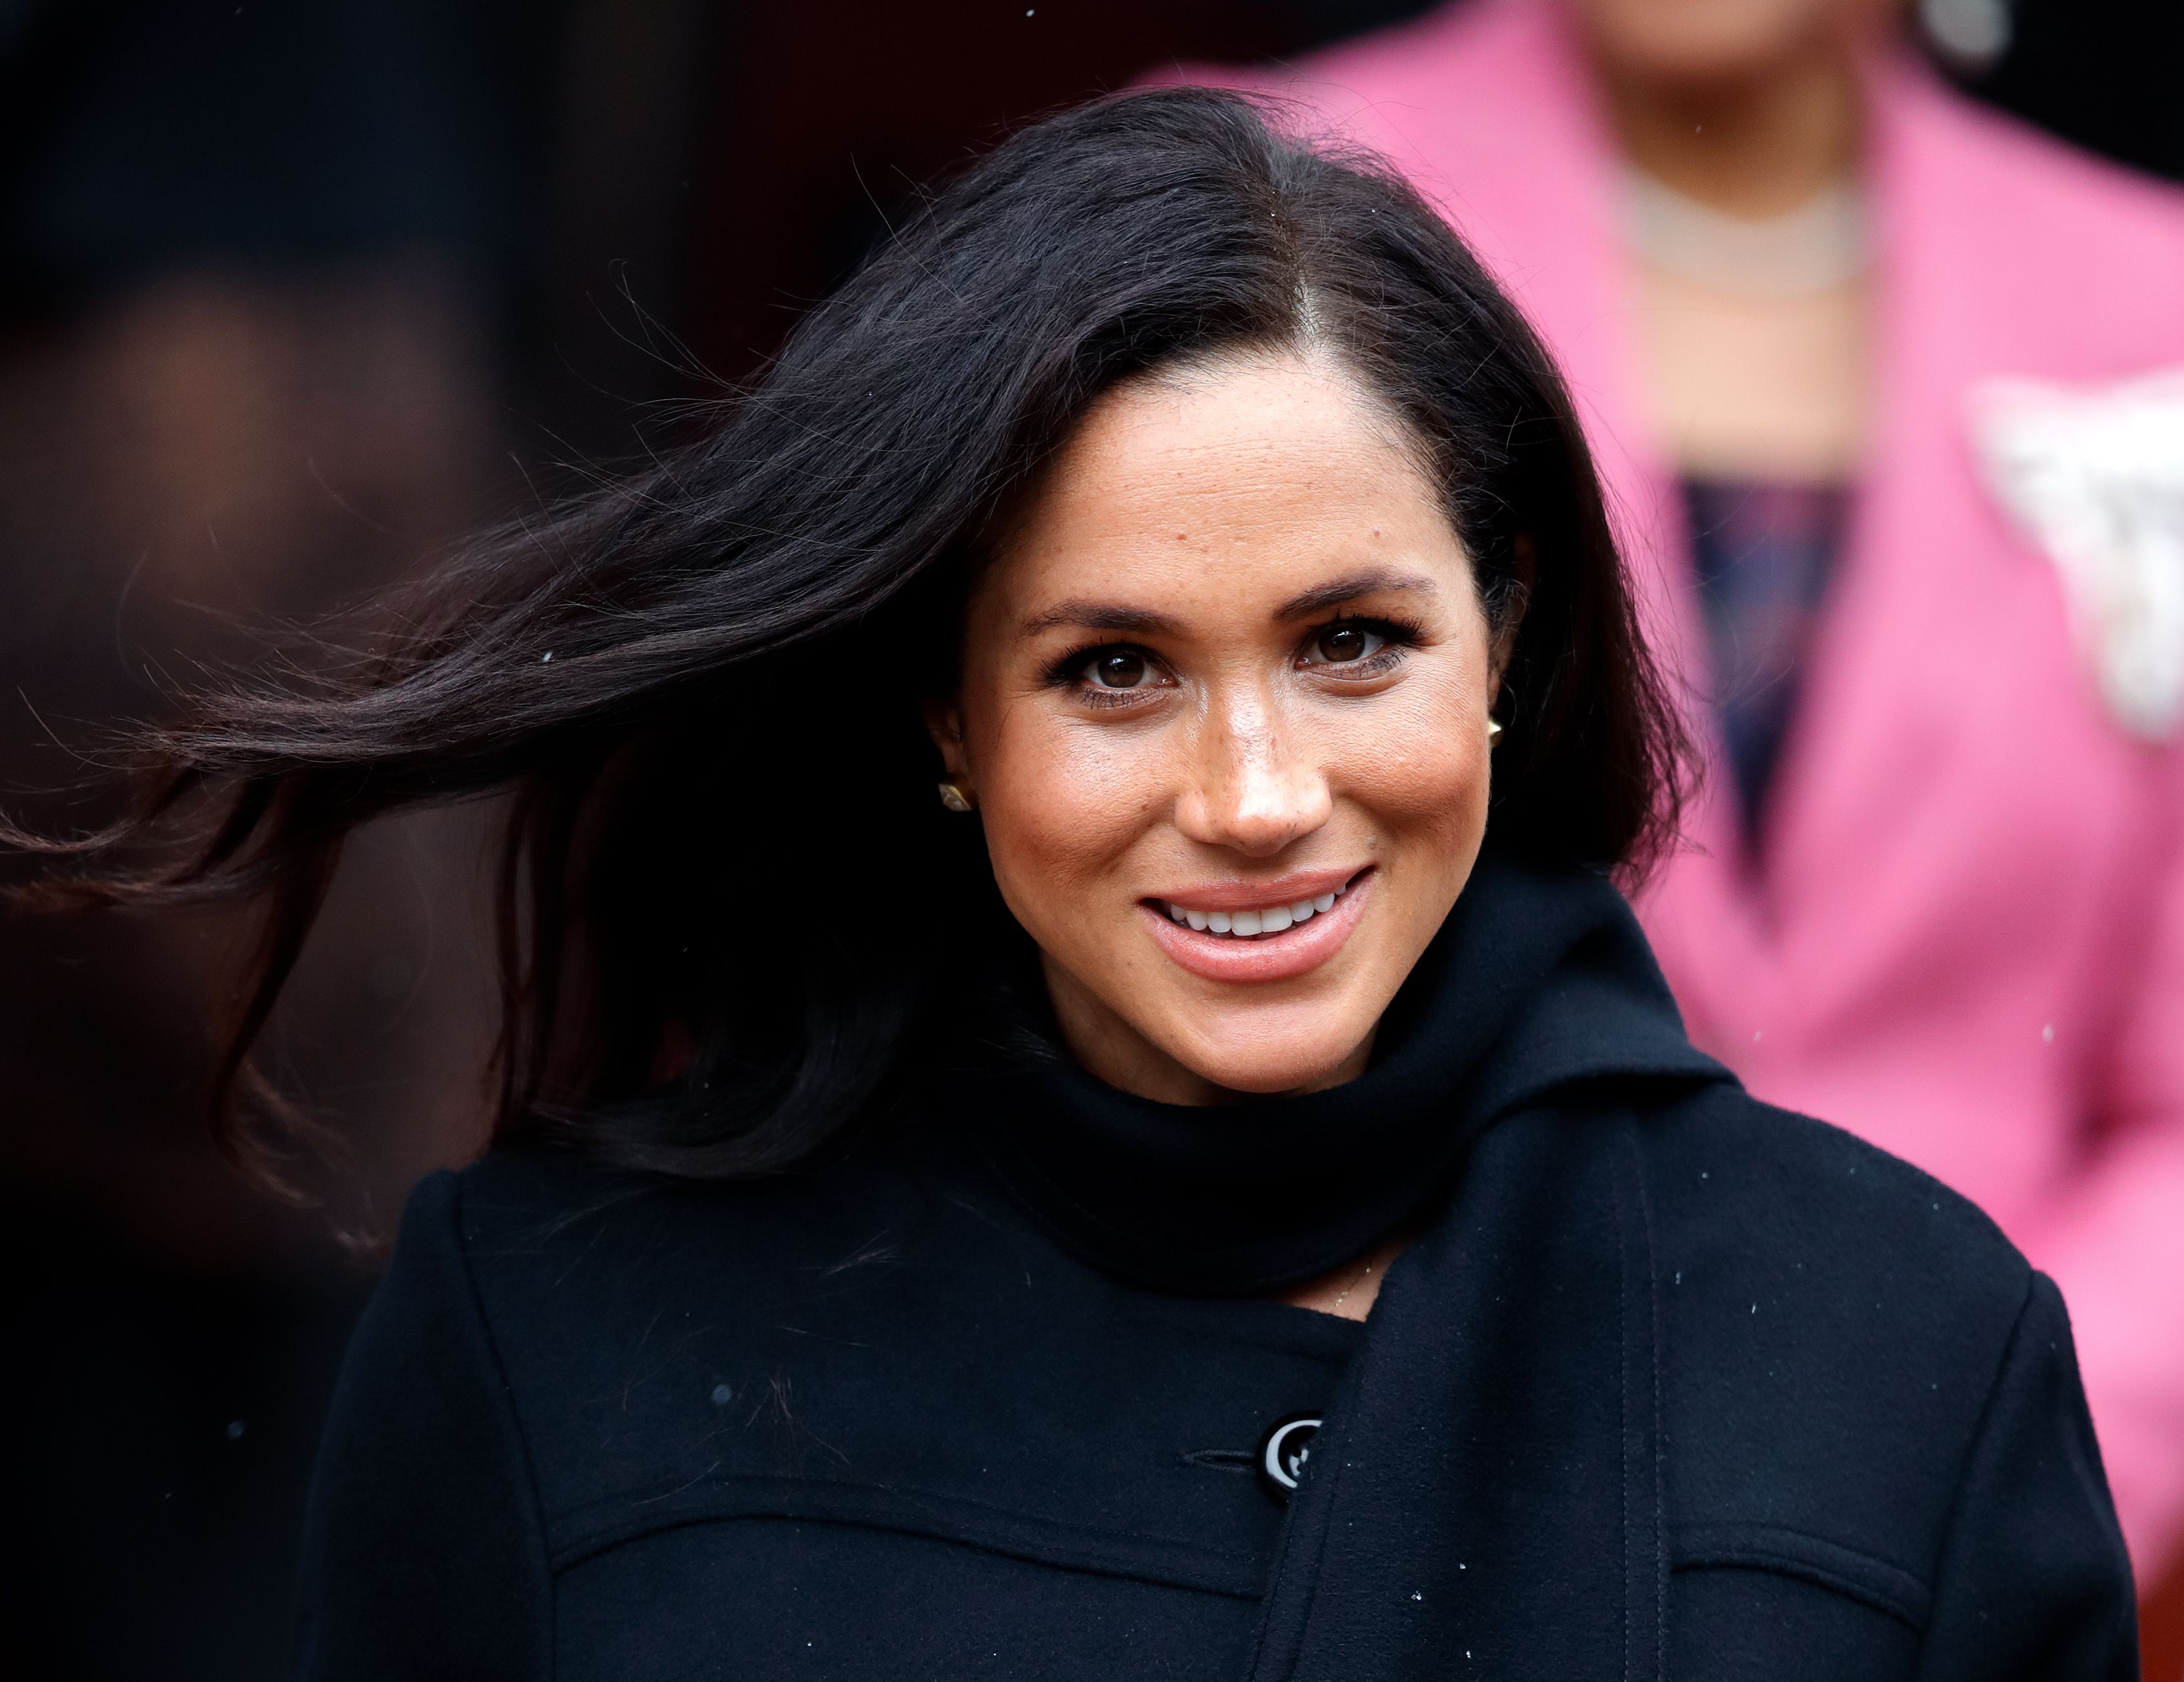 Meghan Markle's Pregnancy: Everything We Know About The Duke And